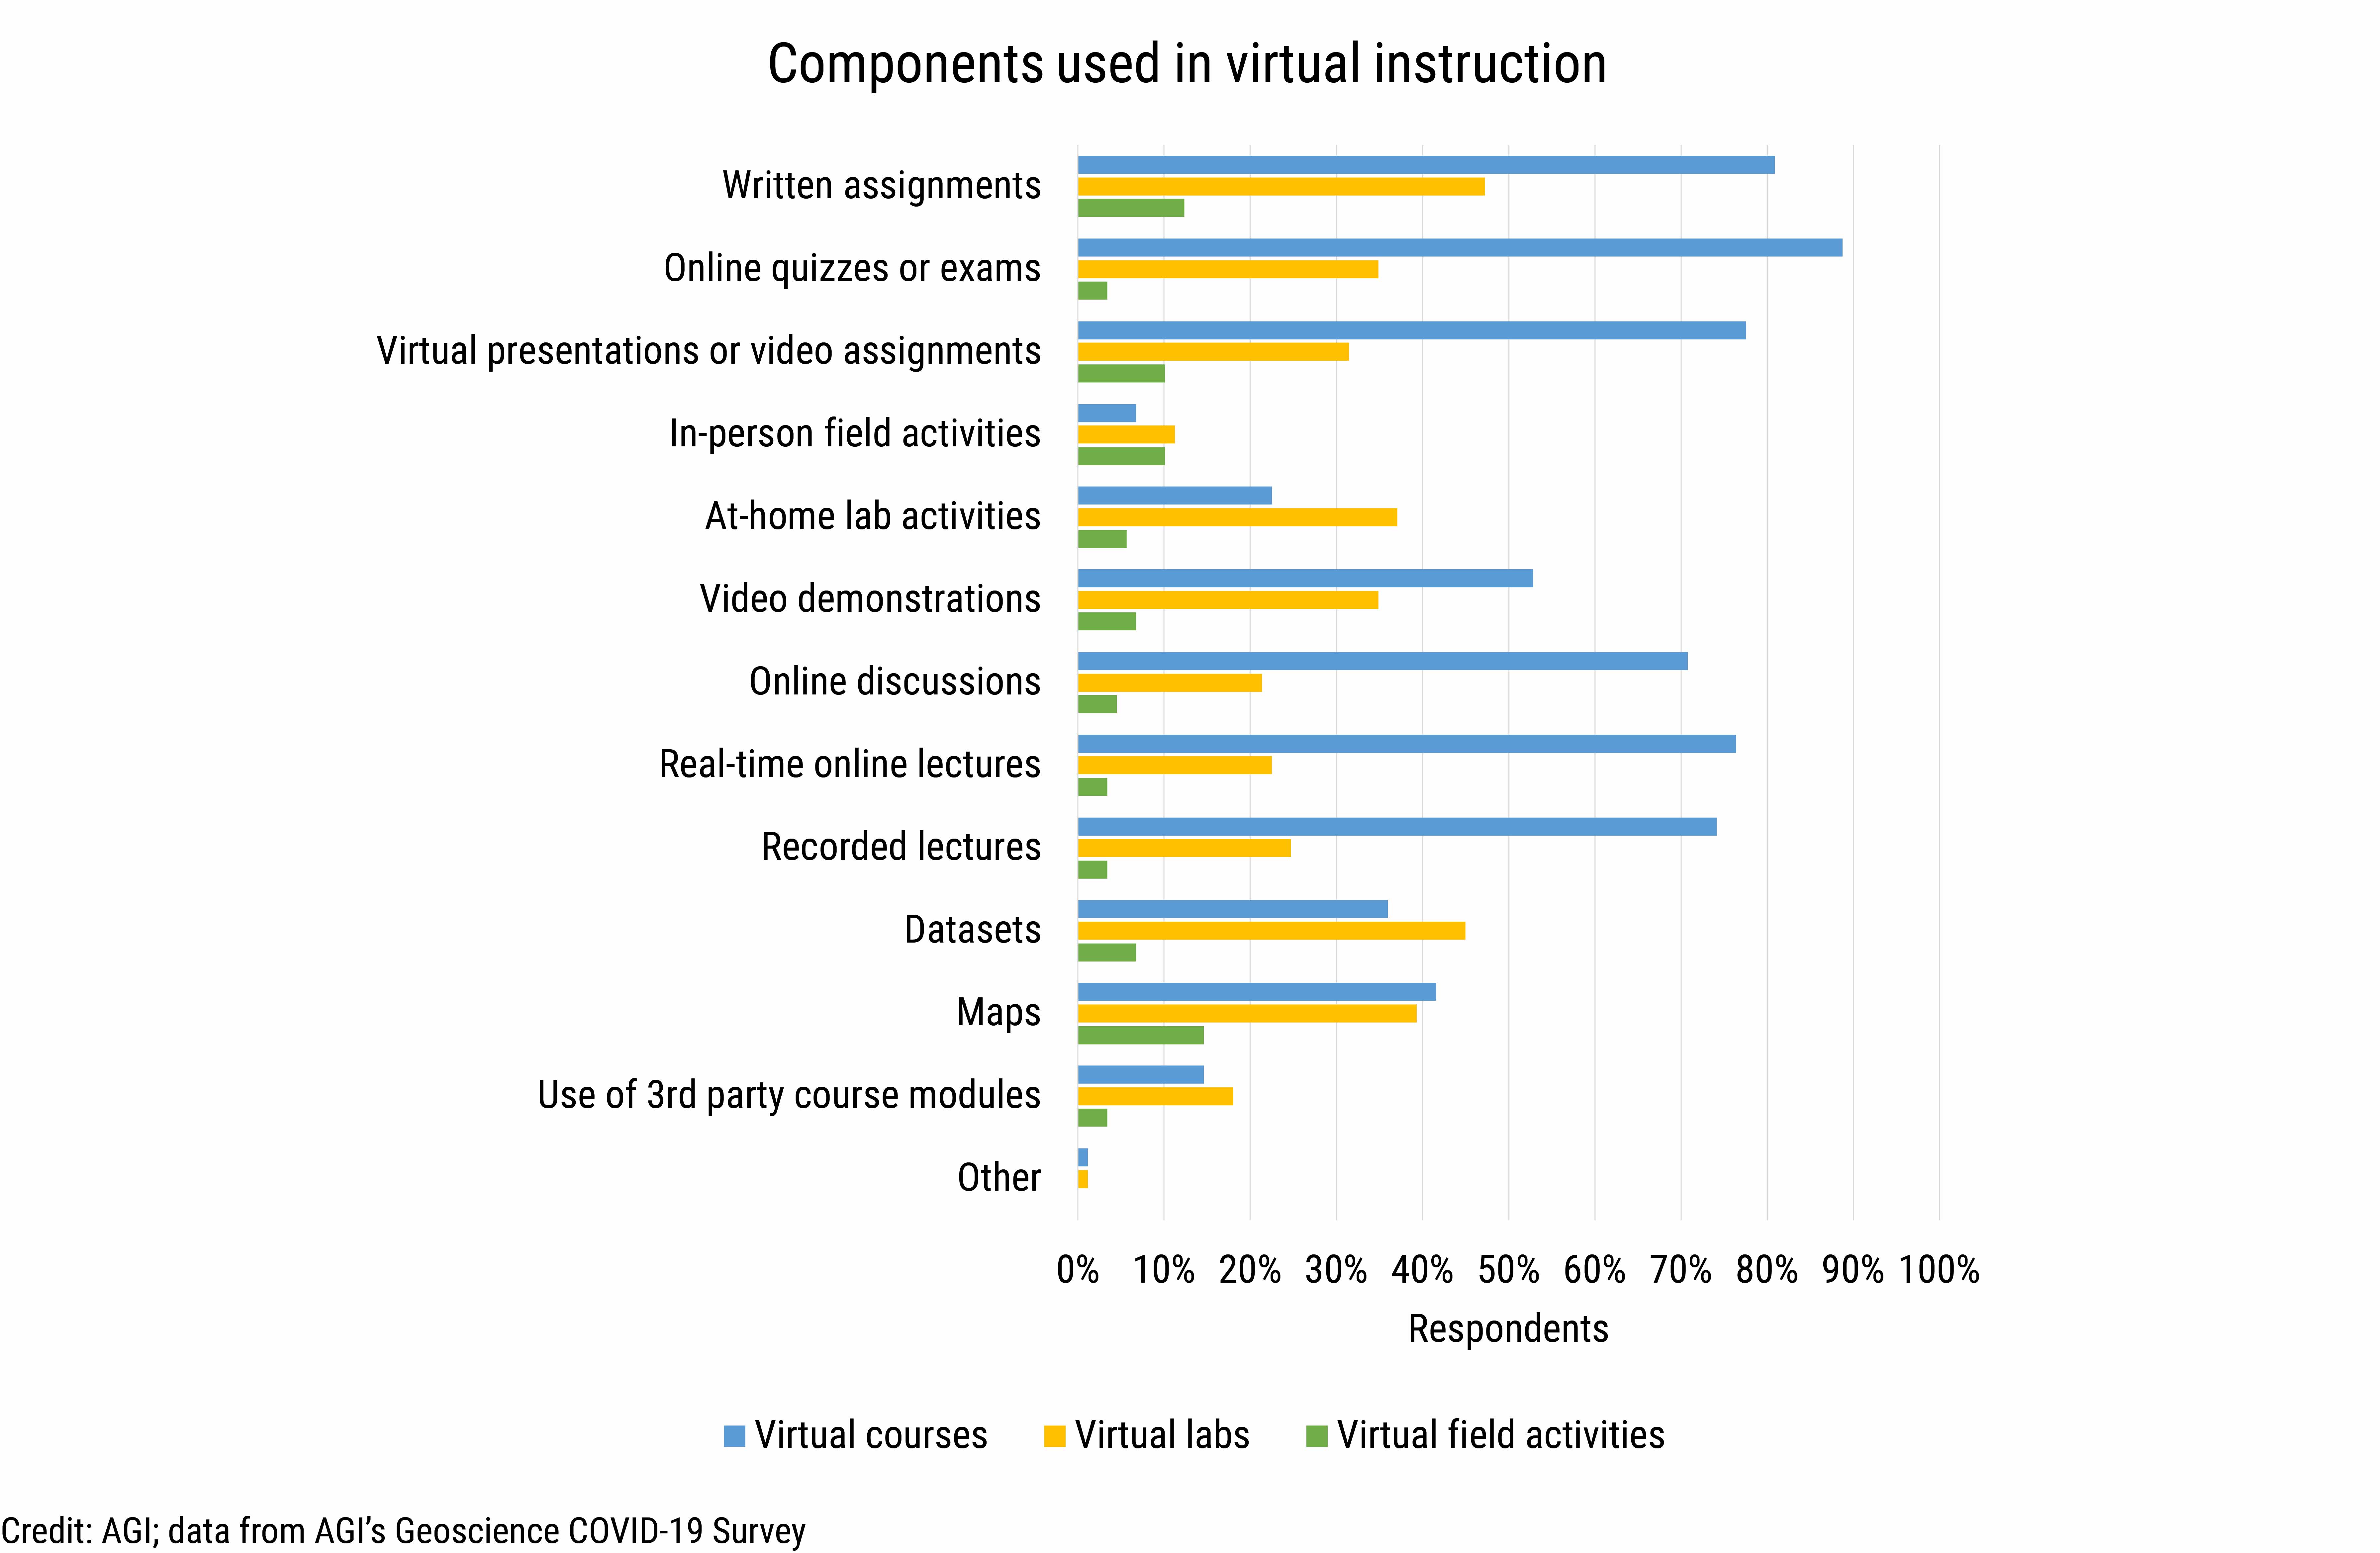 DB_2021-016 chart 04: Components used in virtual instruction (Credit: AGI; data from AGI's Geoscience COVID-19 Survey)